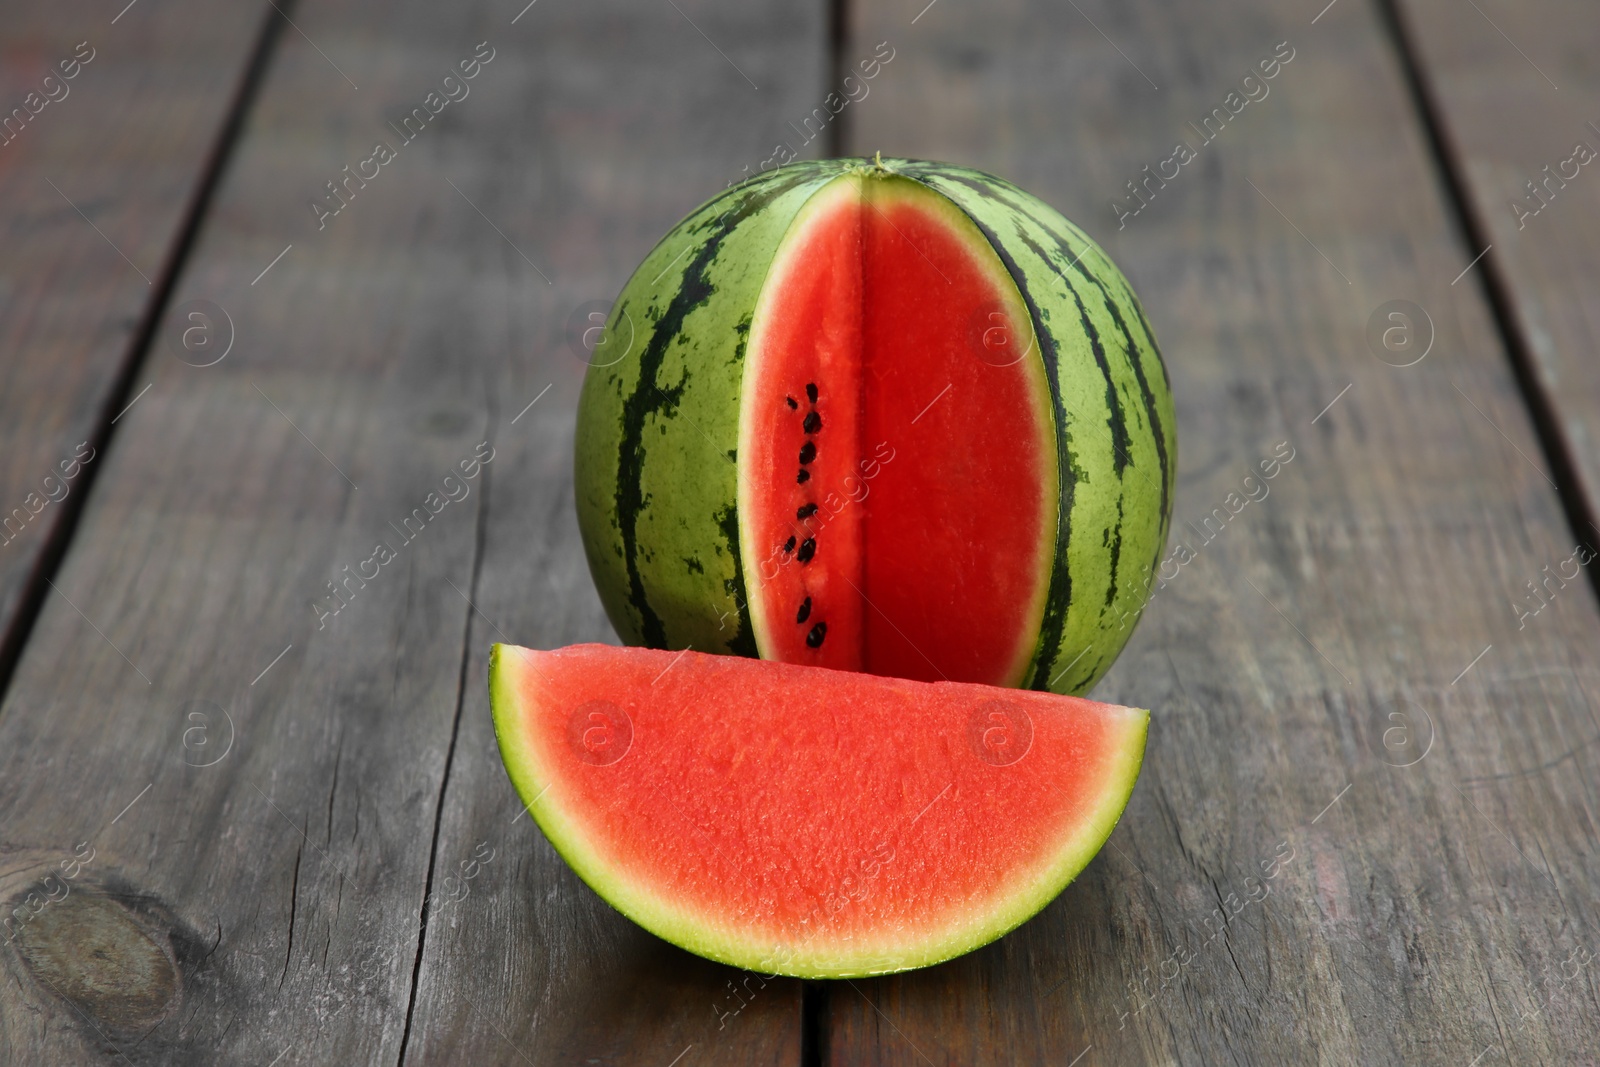 Photo of Cut delicious ripe watermelon on wooden table